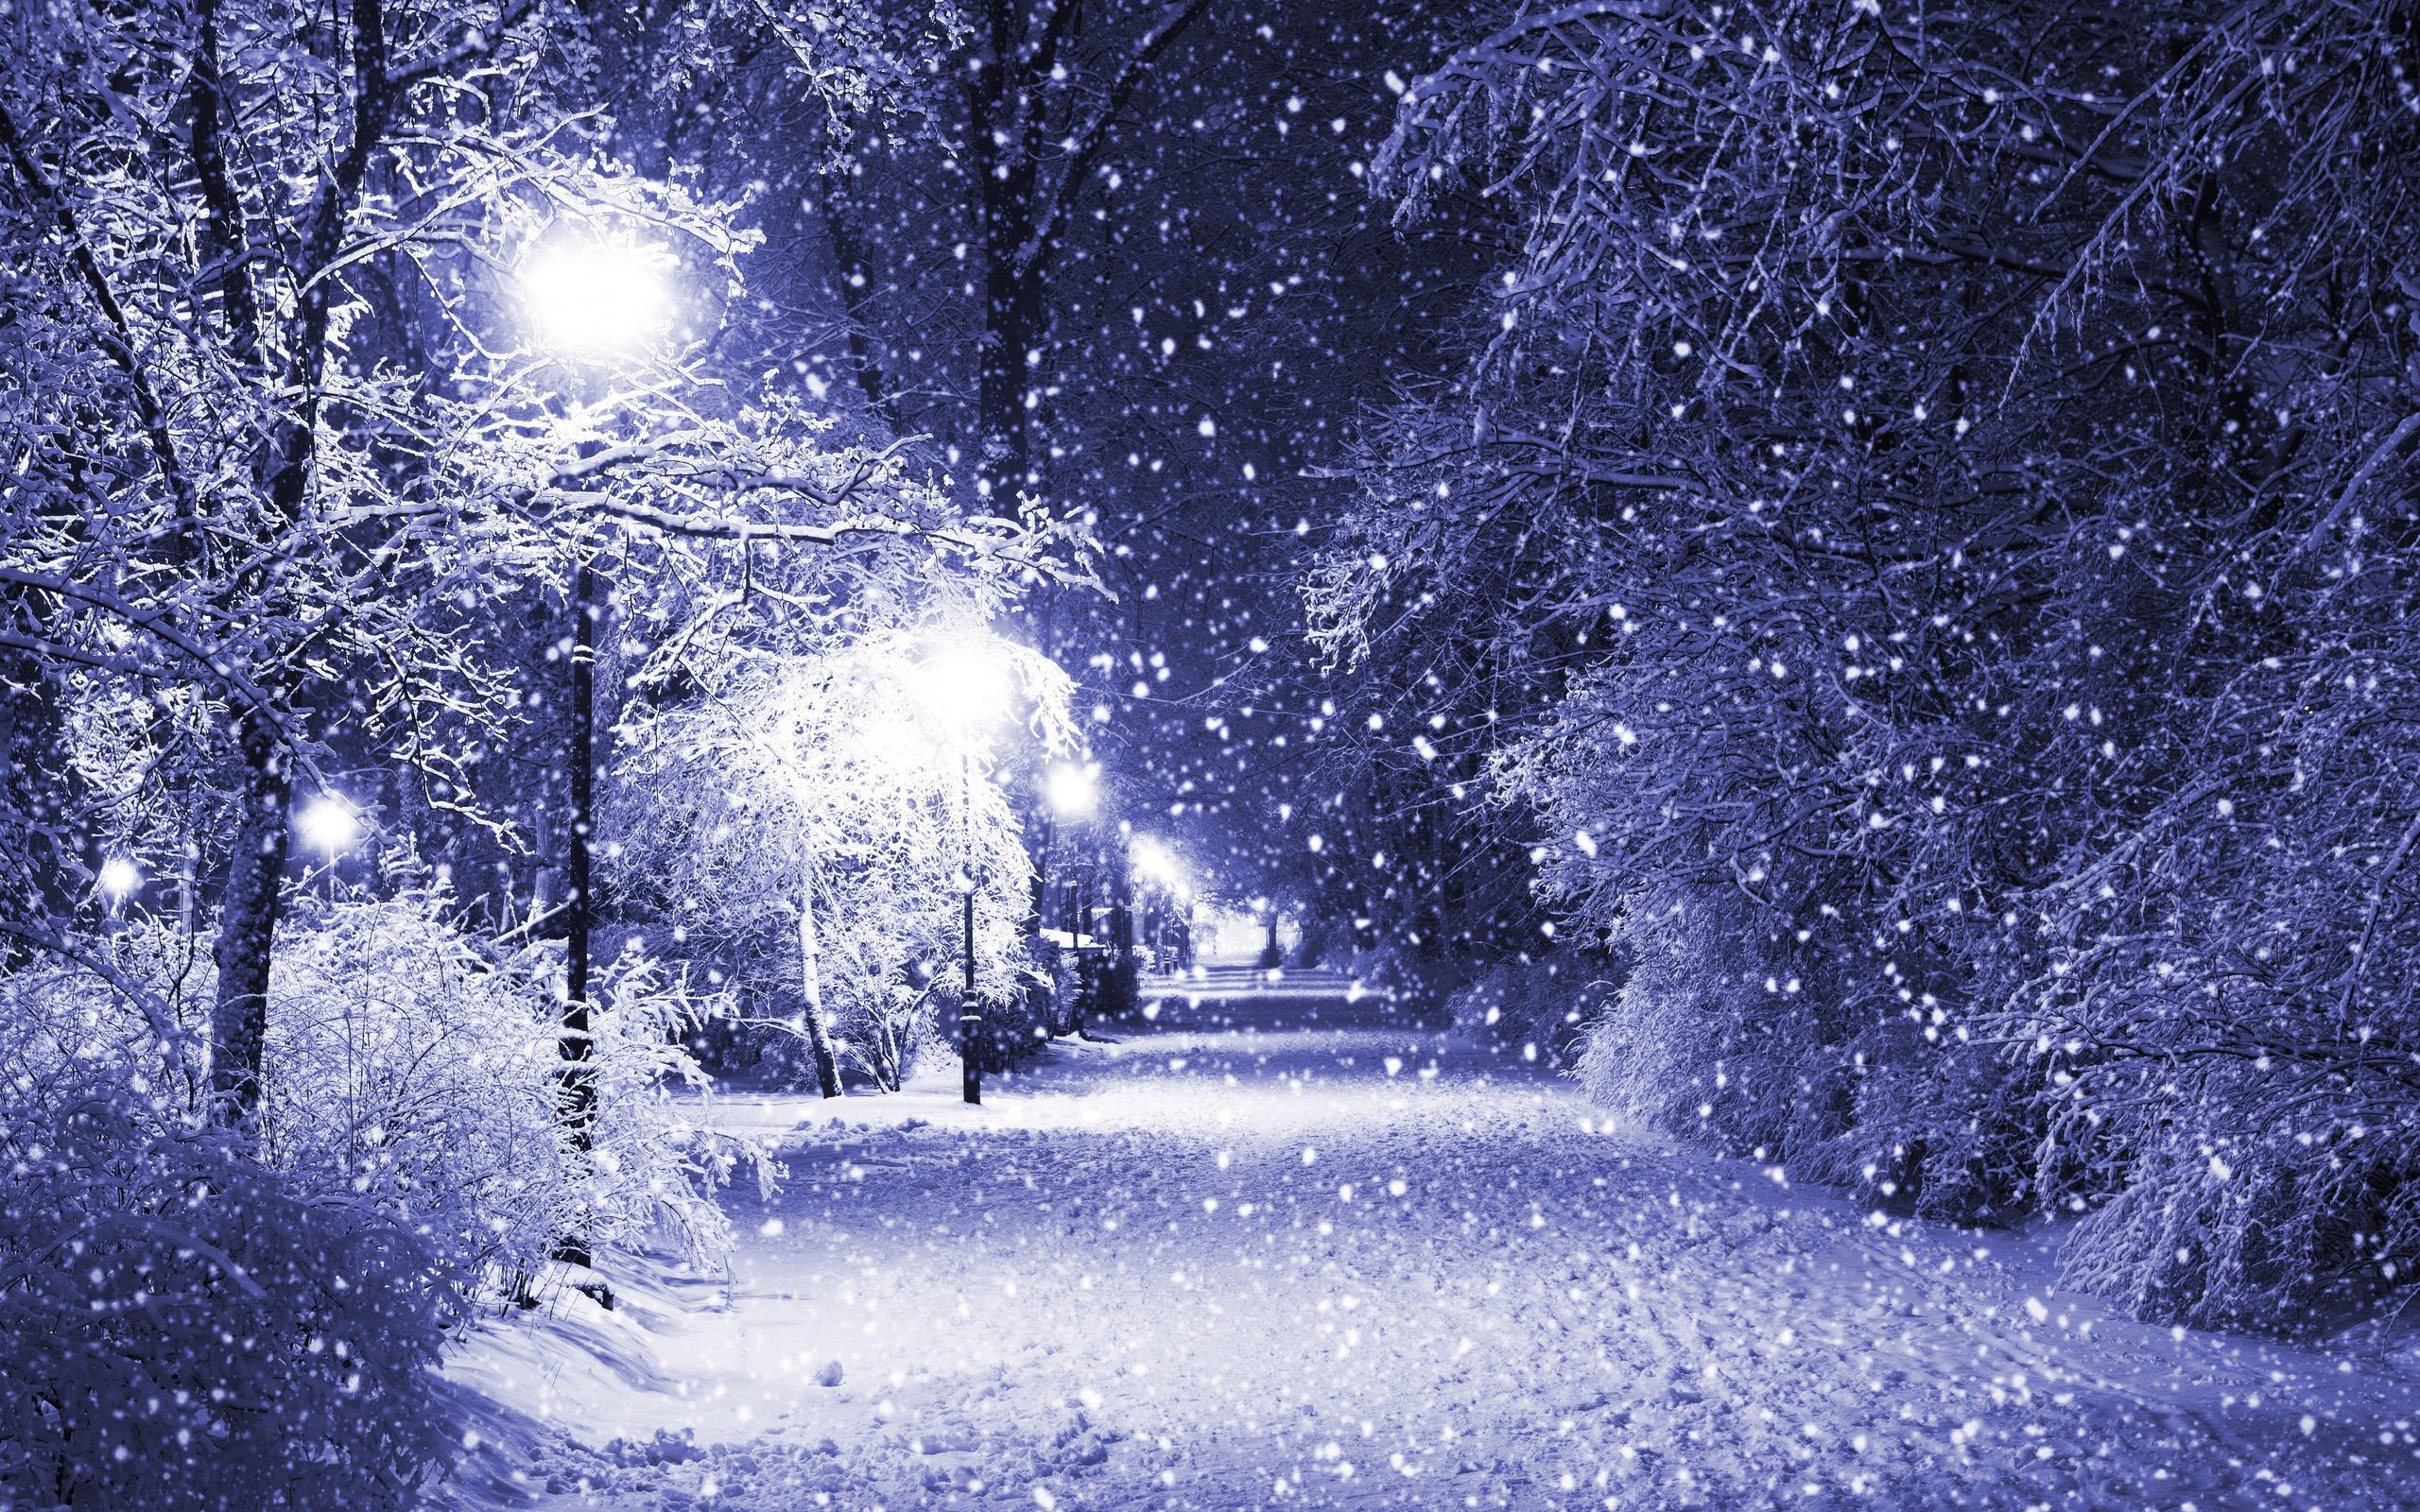 Snowy Christmas Background Image